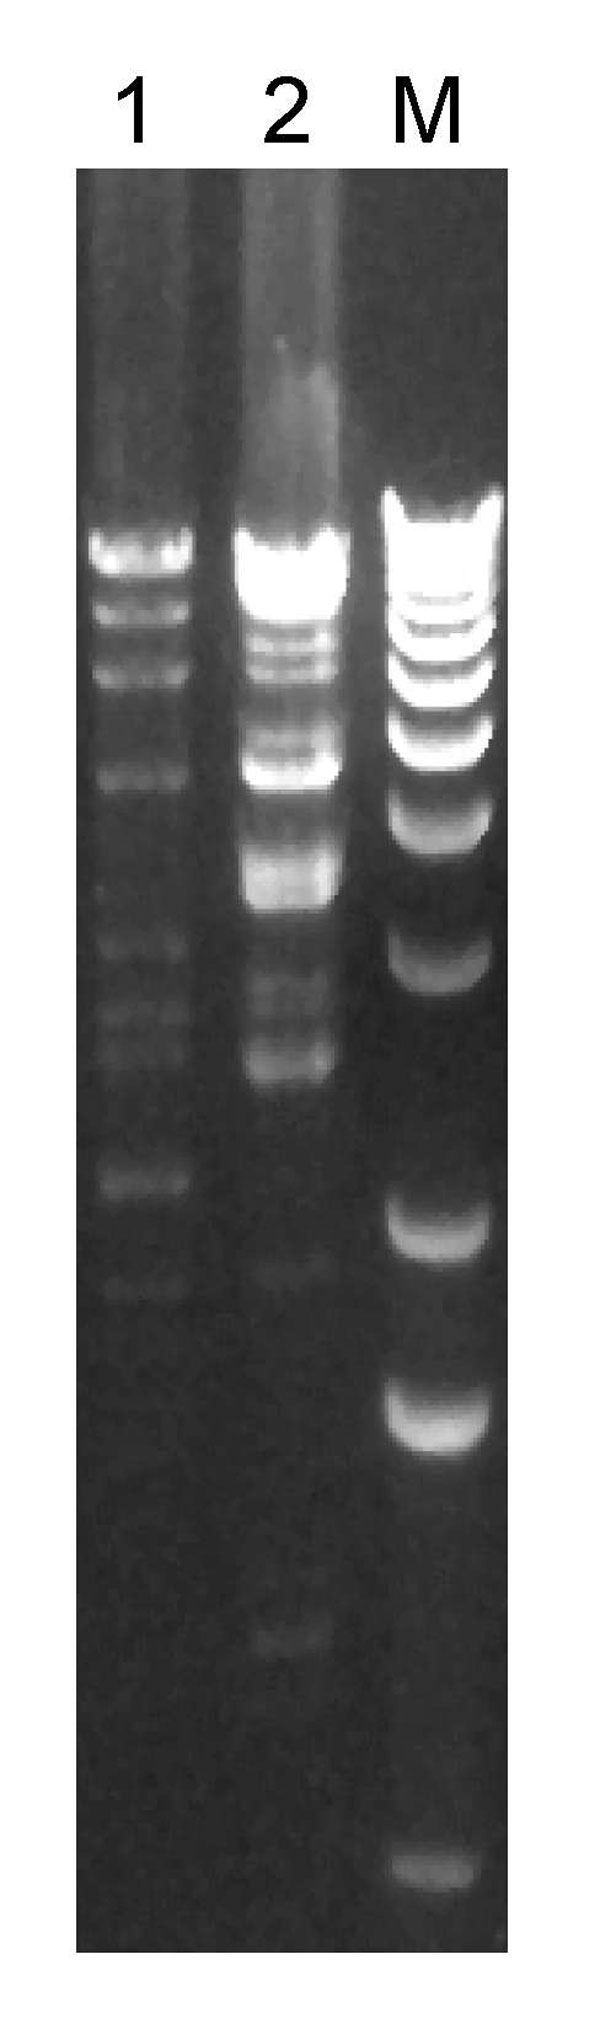 Restriction enzyme (HindIII) digest of plasmids prepared from vancomycin-resistant Staphylococcus aureus (VRSA) isolates from 2 patients in Michigan, USA, 2007. Each lane is labeled with the VRSA isolate number; lane M, 1-kb molecular marker.